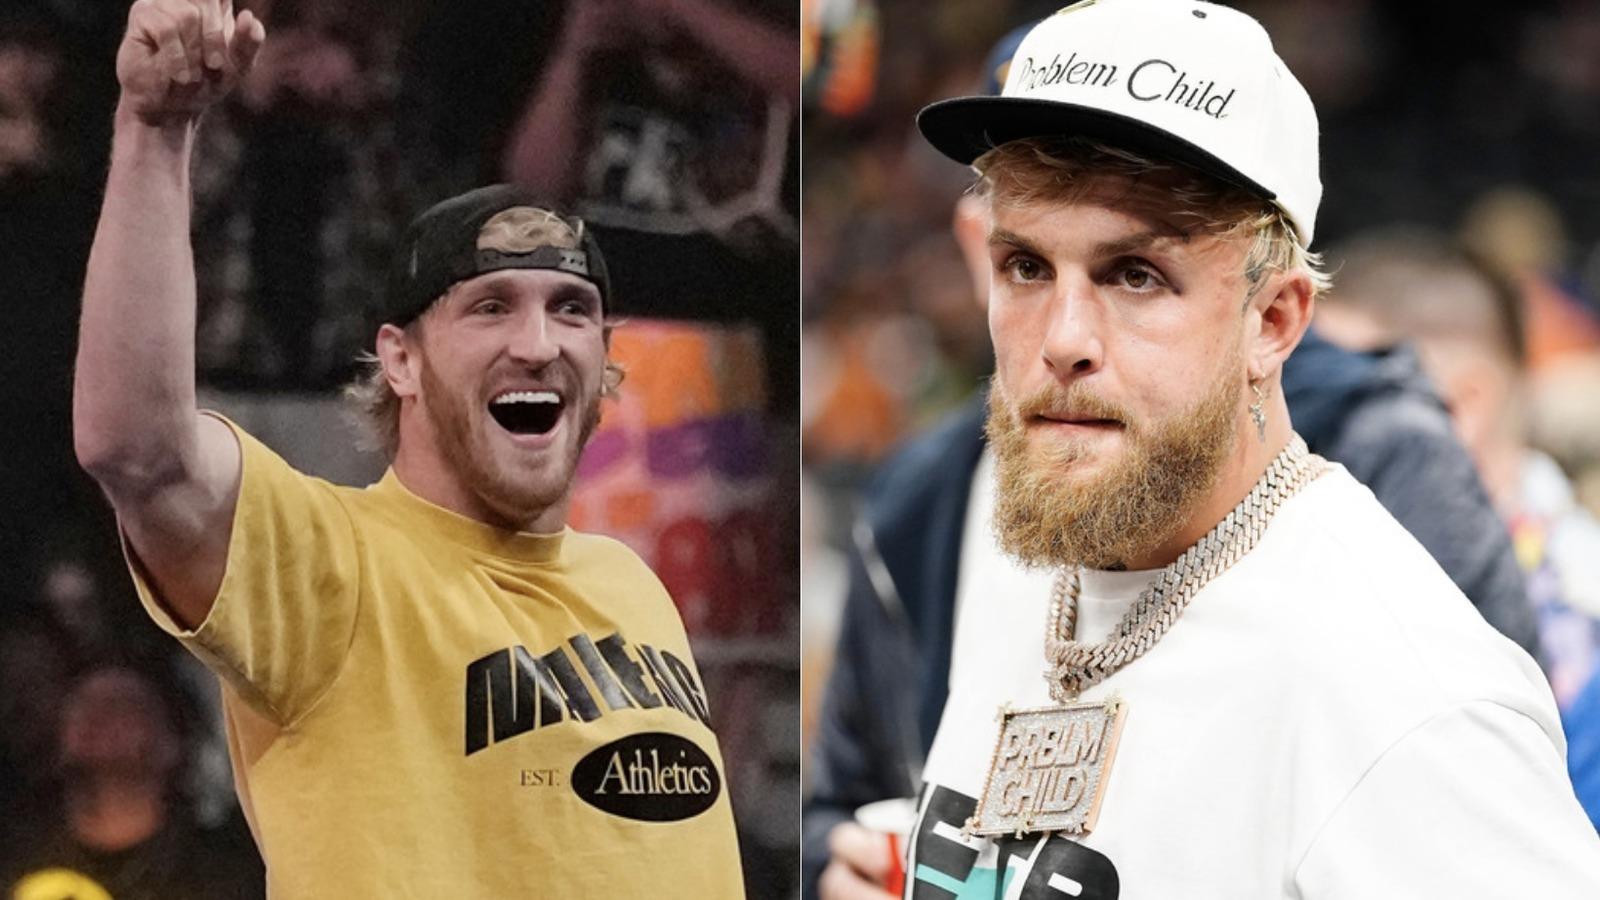 Jake Paul calls out brother Logan for “lying” about Mike Tyson fight